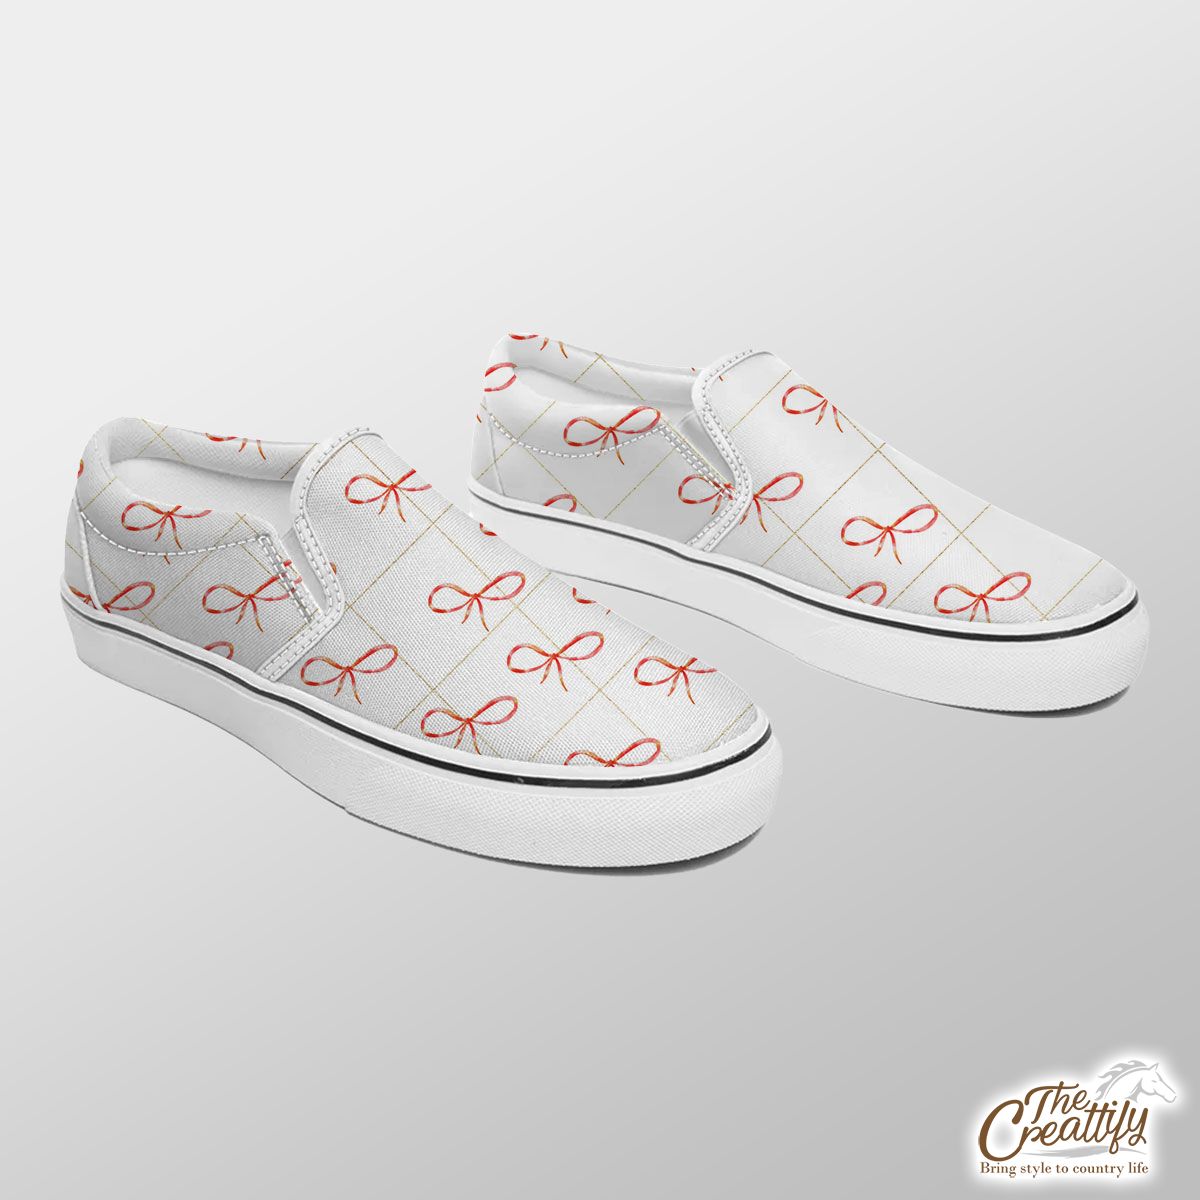 Christmas Bow On White Background Slip On Sneakers